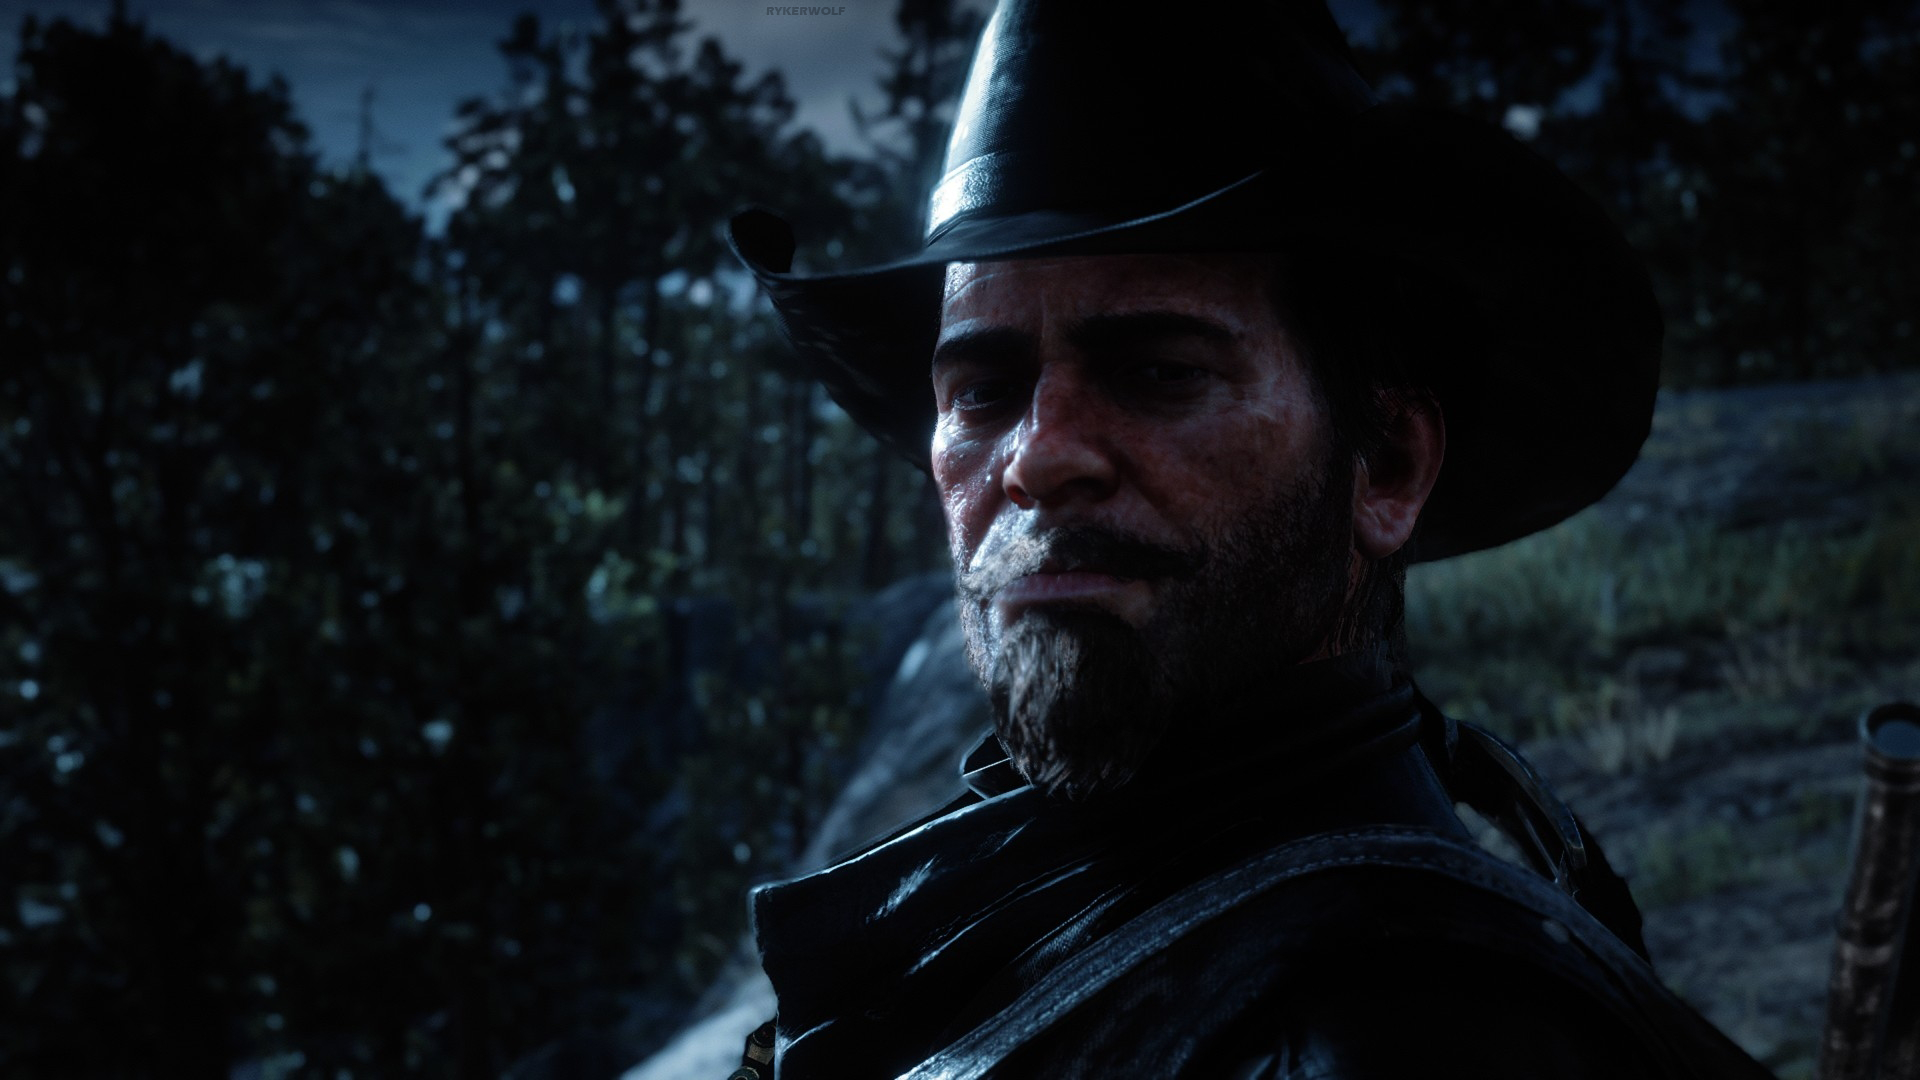 General 1920x1080 Red Dead Redemption Red Dead Redemption 2 Arthur Morgan Rockstar Games video games CGI video game characters hat beard